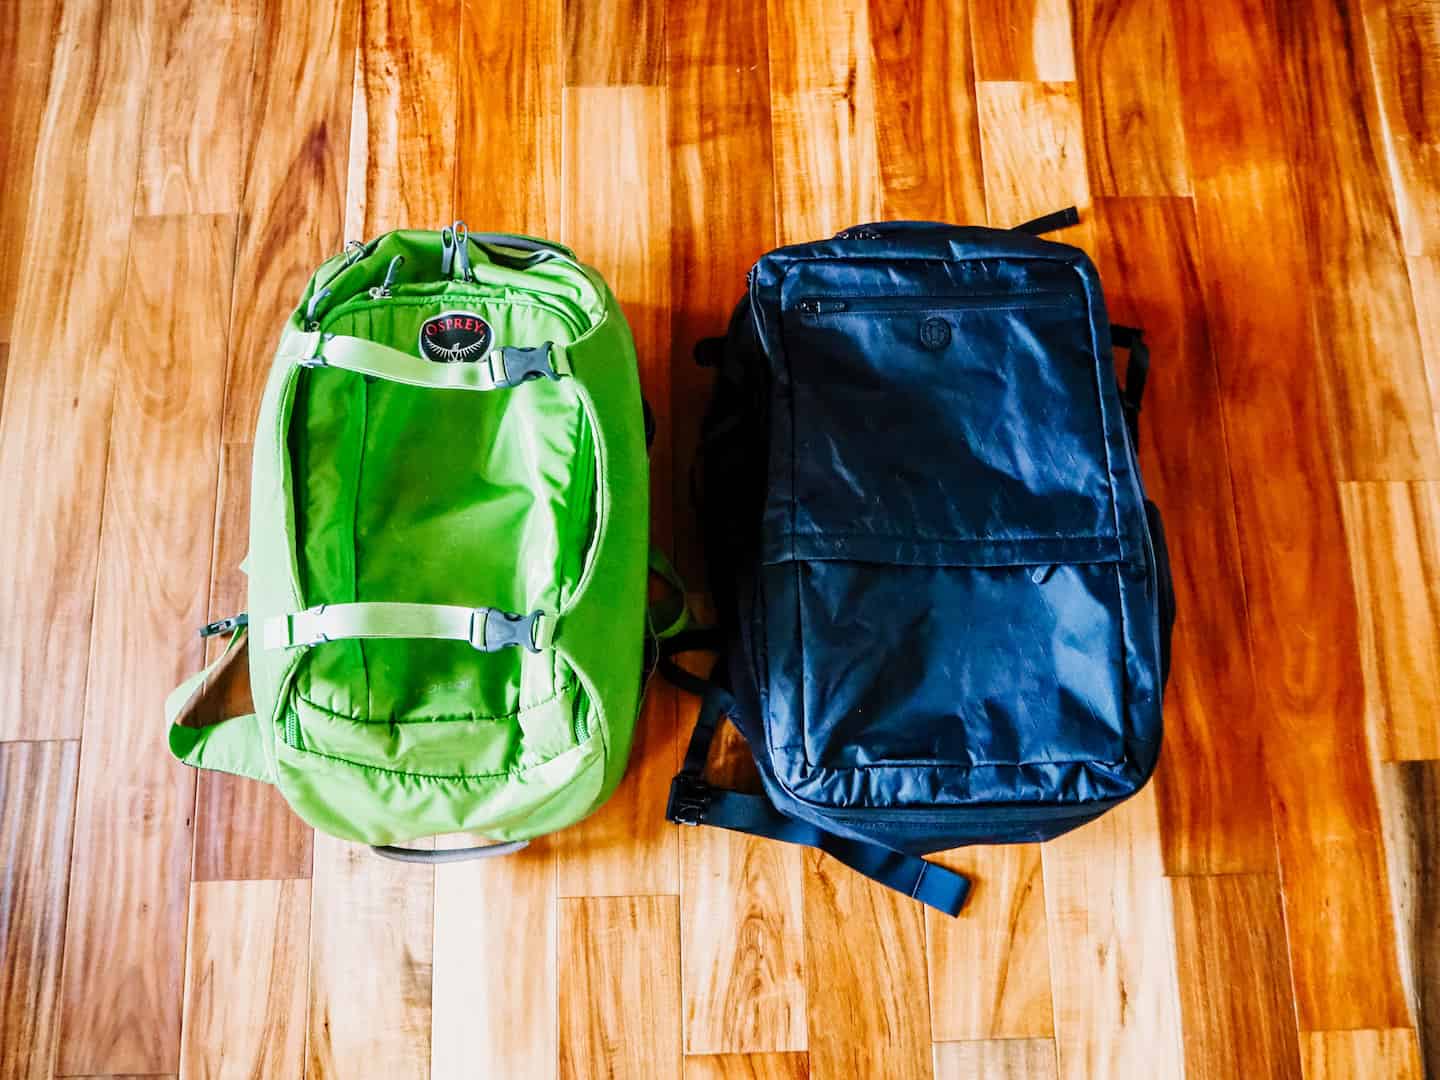 1 green and 1 black backpack side by side